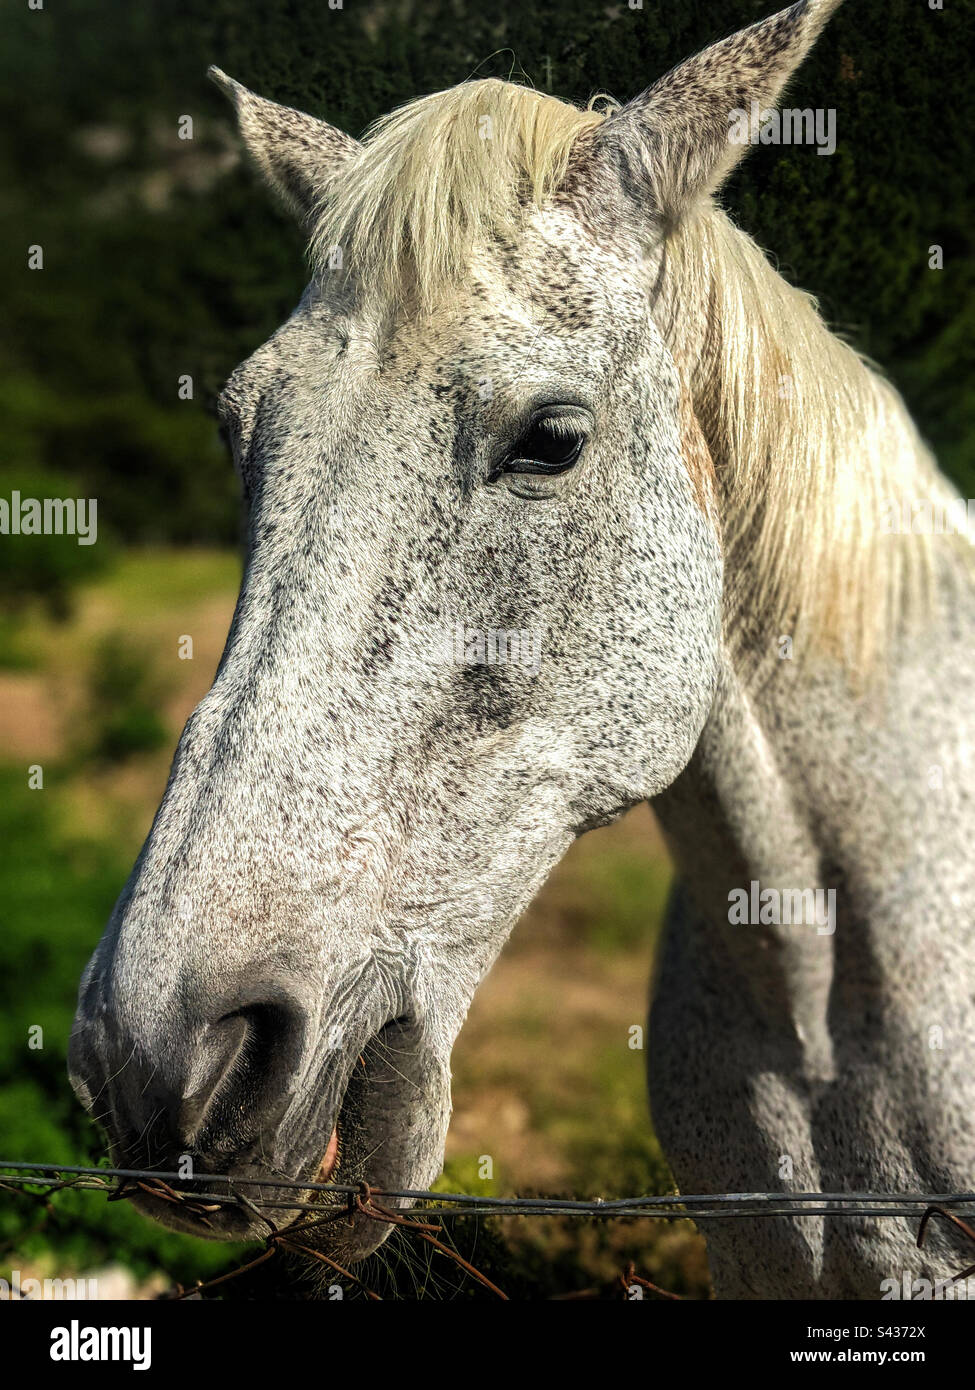 White horse with small black spots. Stock Photo